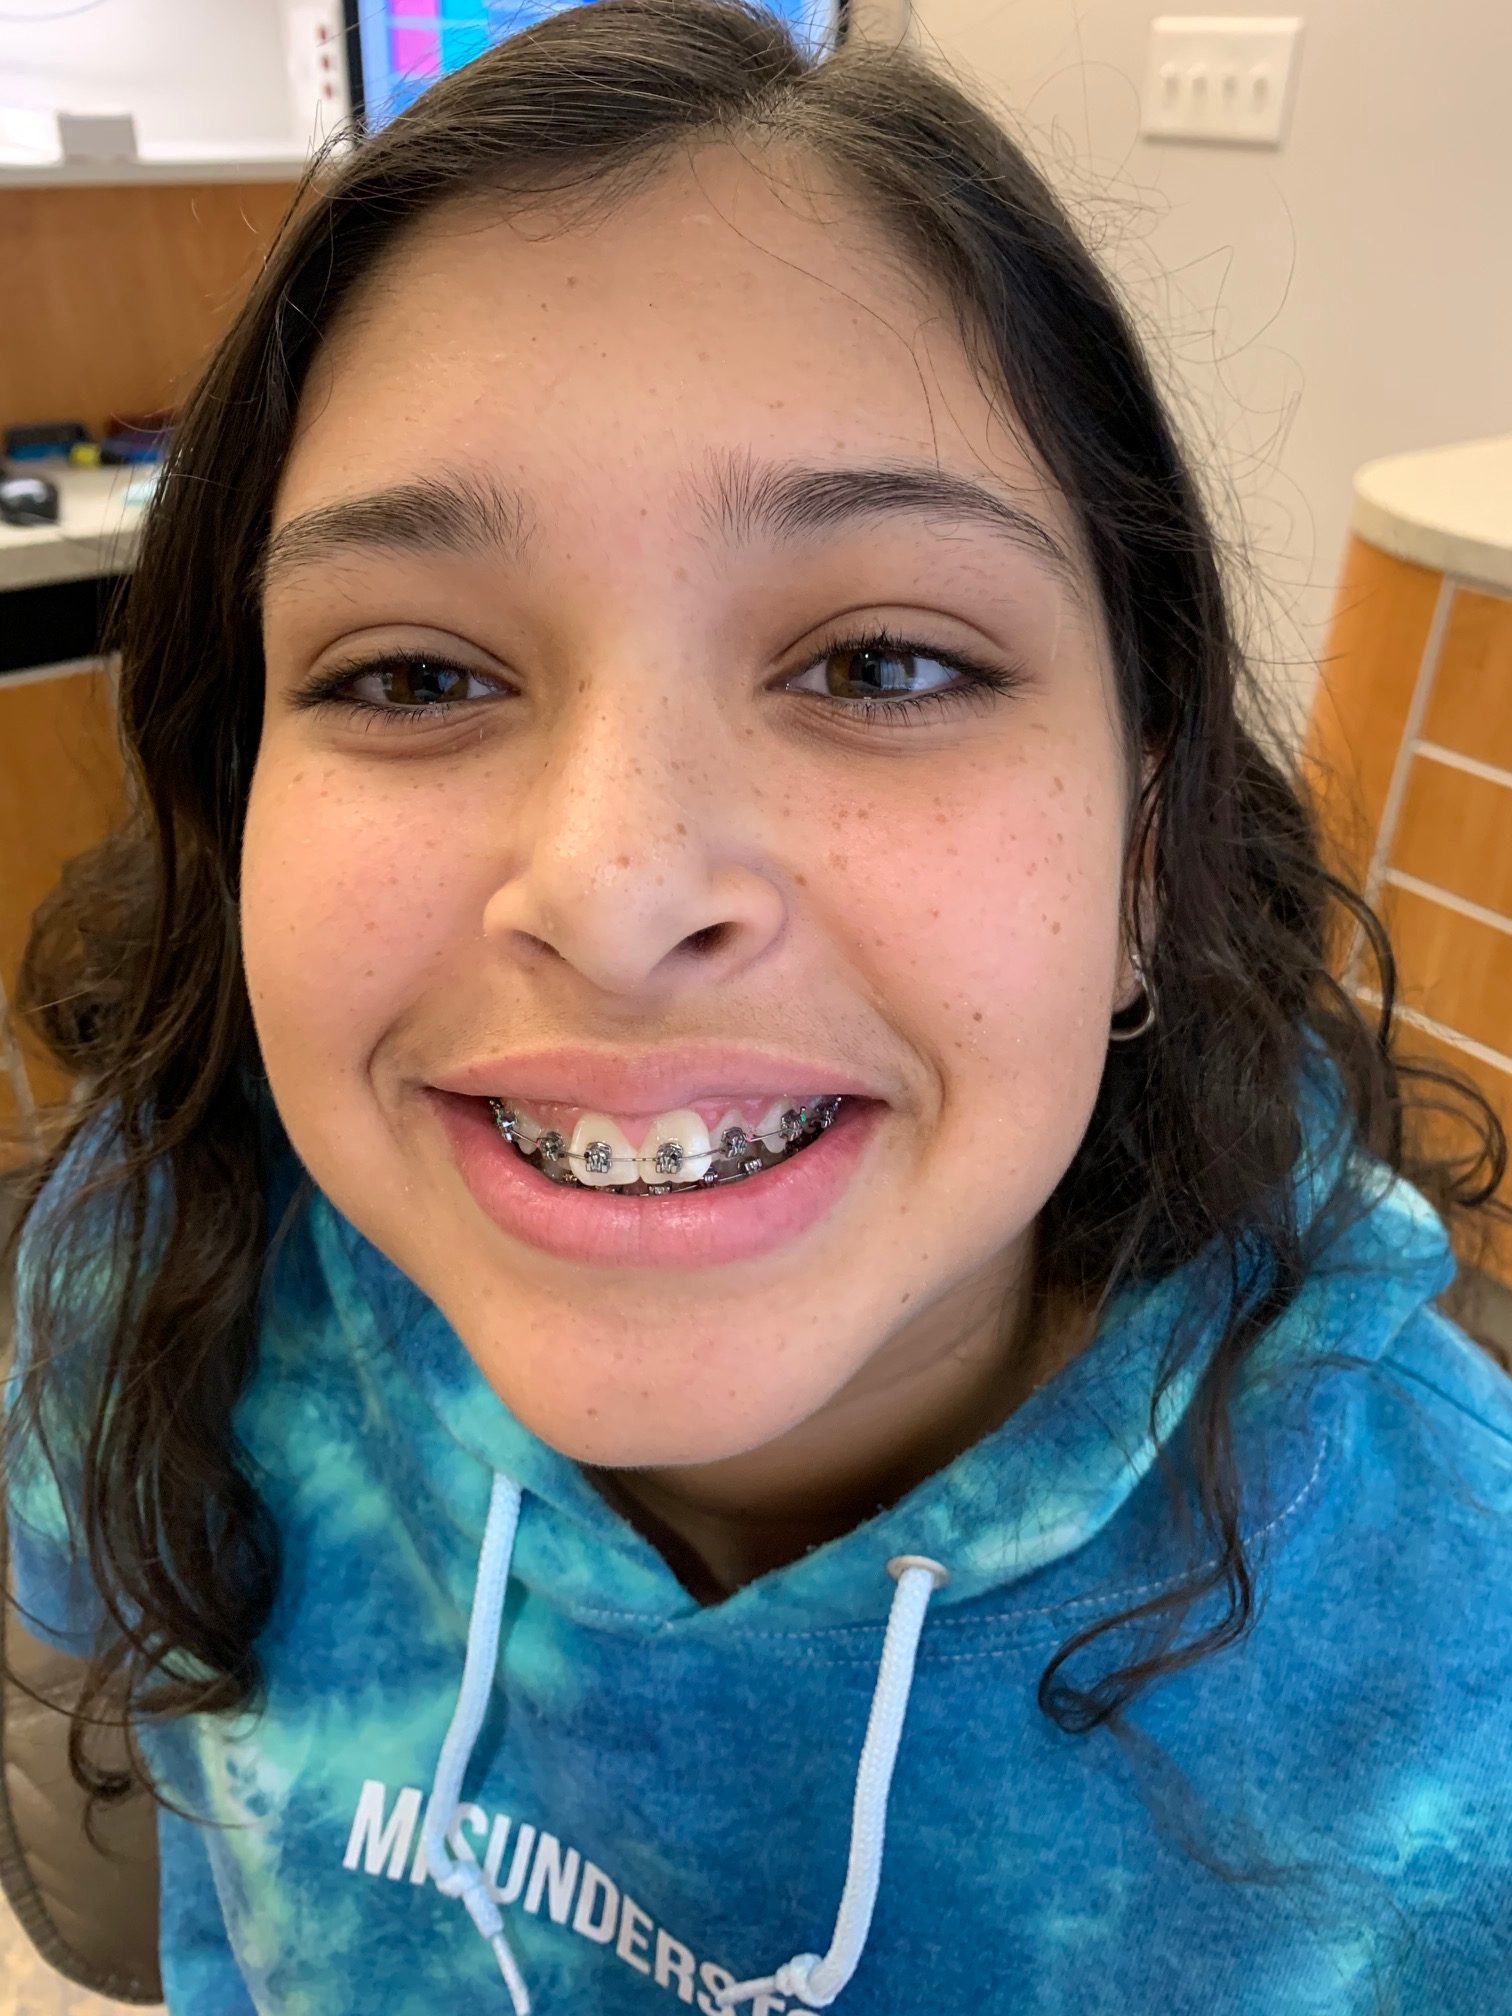 How Much Do Braces Cost? Find Affordable Braces at Kool Smiles